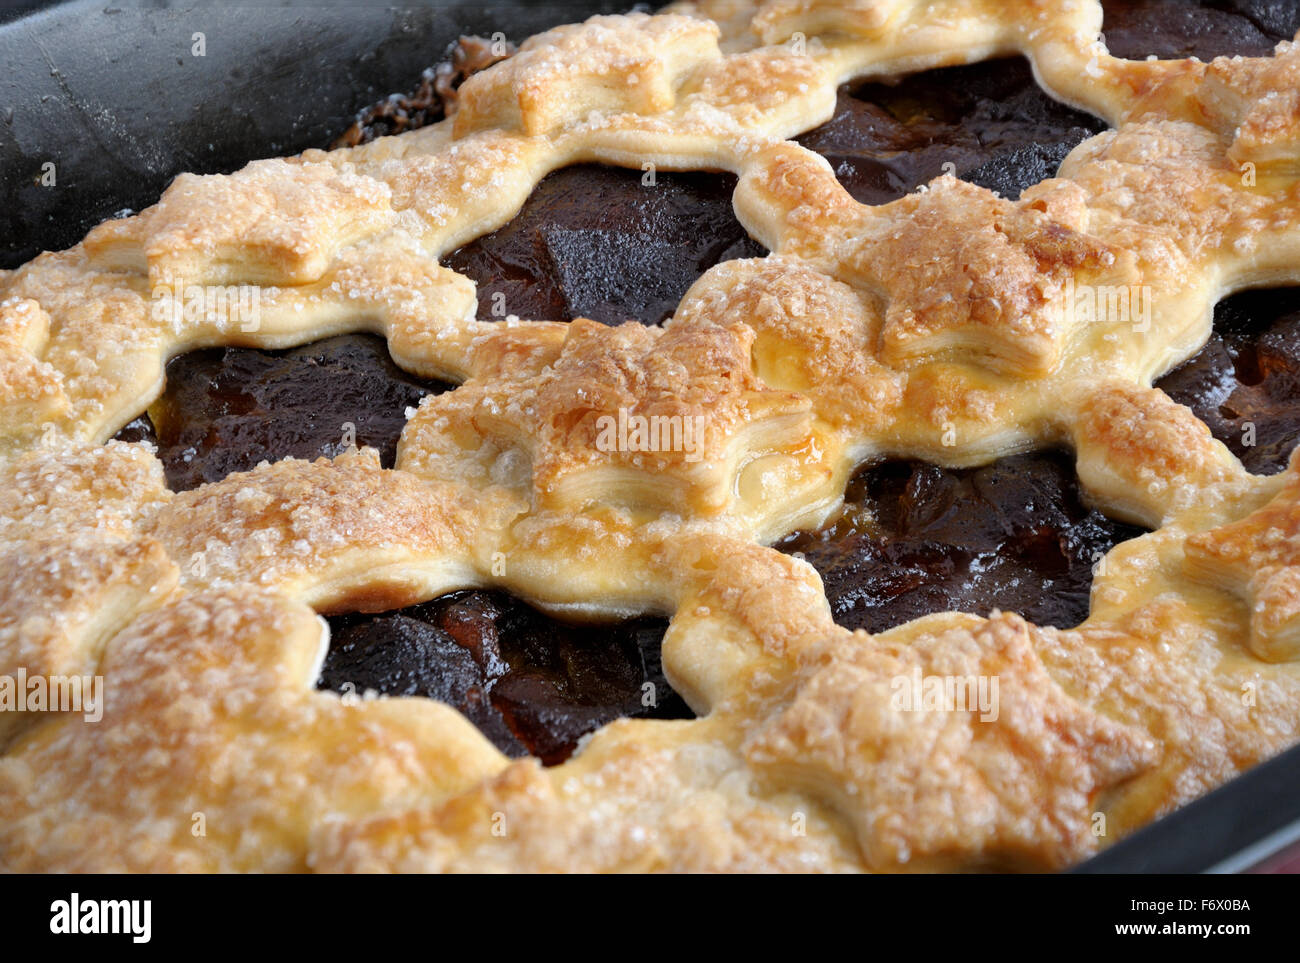 strudel stuffed with apples and jam closeup Stock Photo